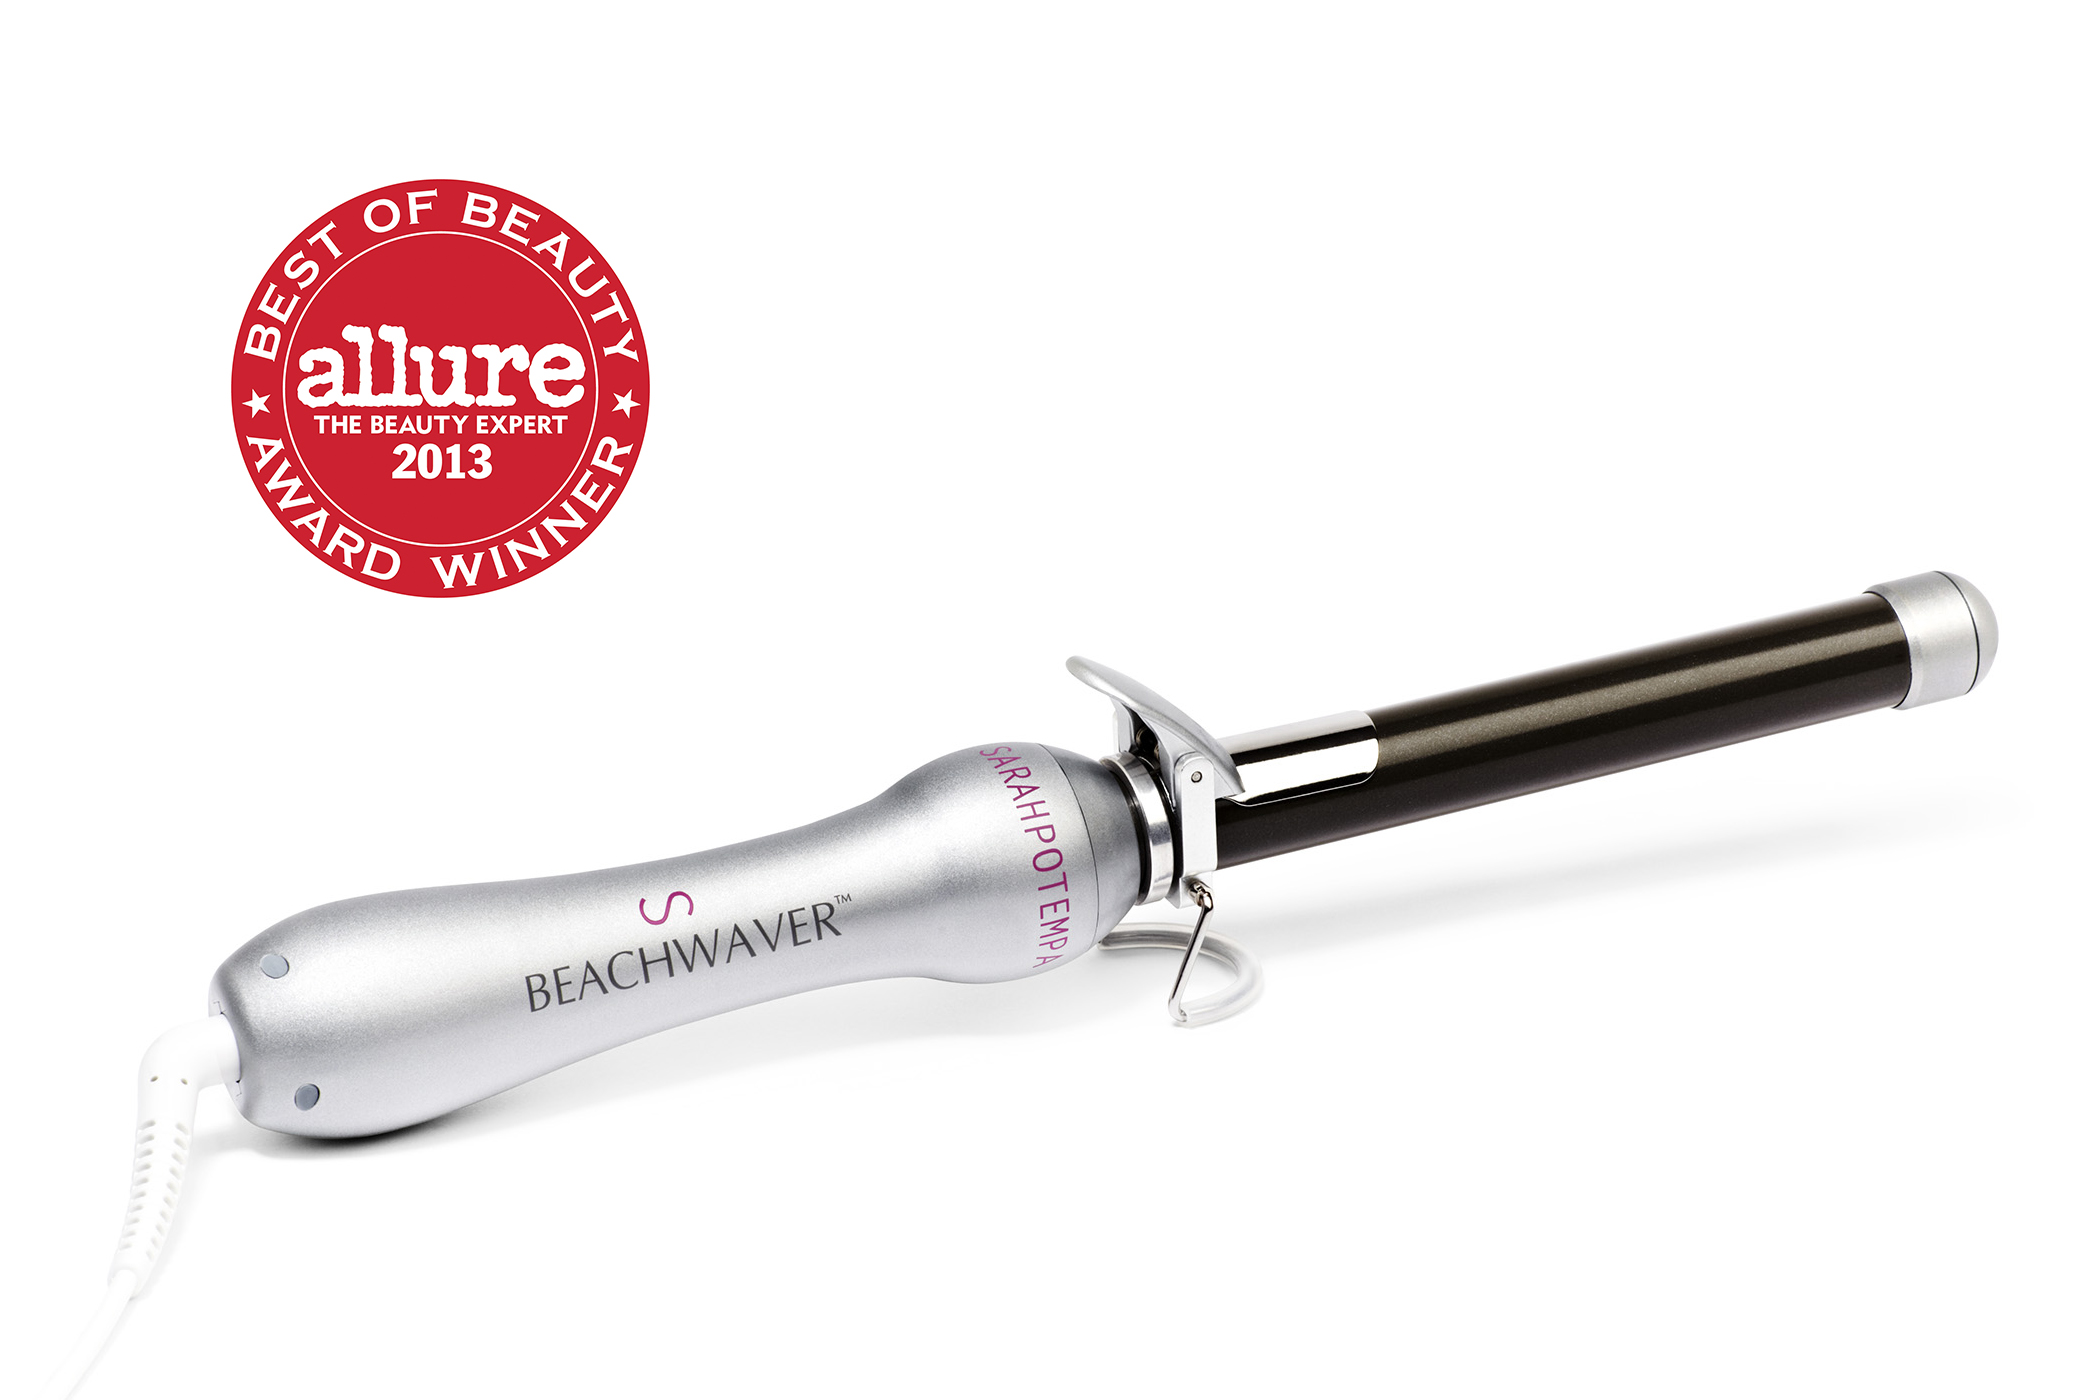 BEACHWAVER Best Curling Iron of 2013 and Comparative Wand from $25